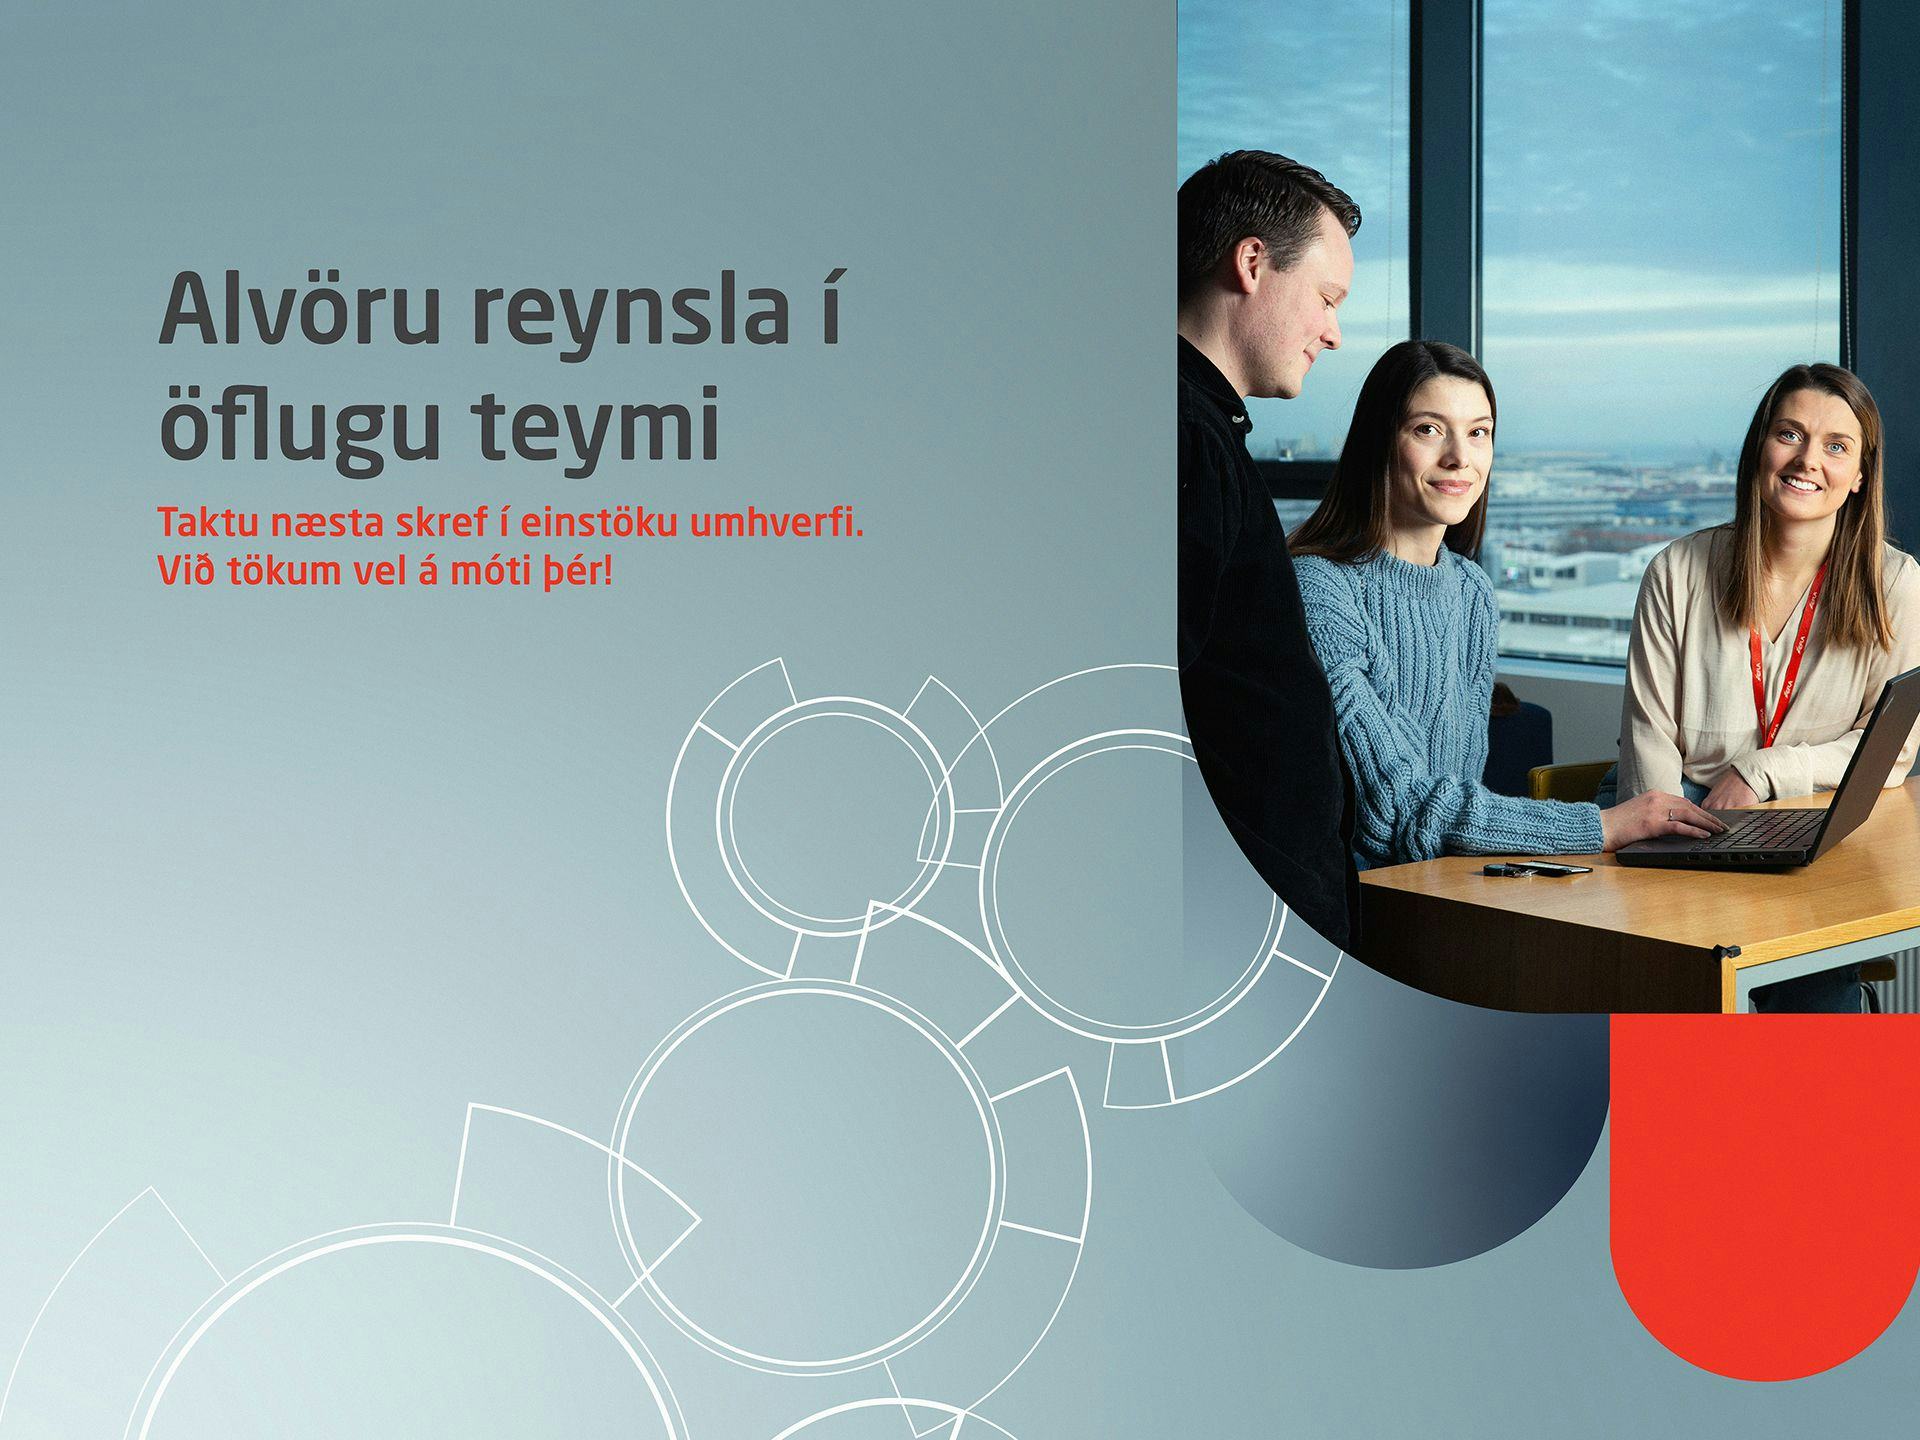 A promotional graphic with Icelandic text featuring three people in an office setting